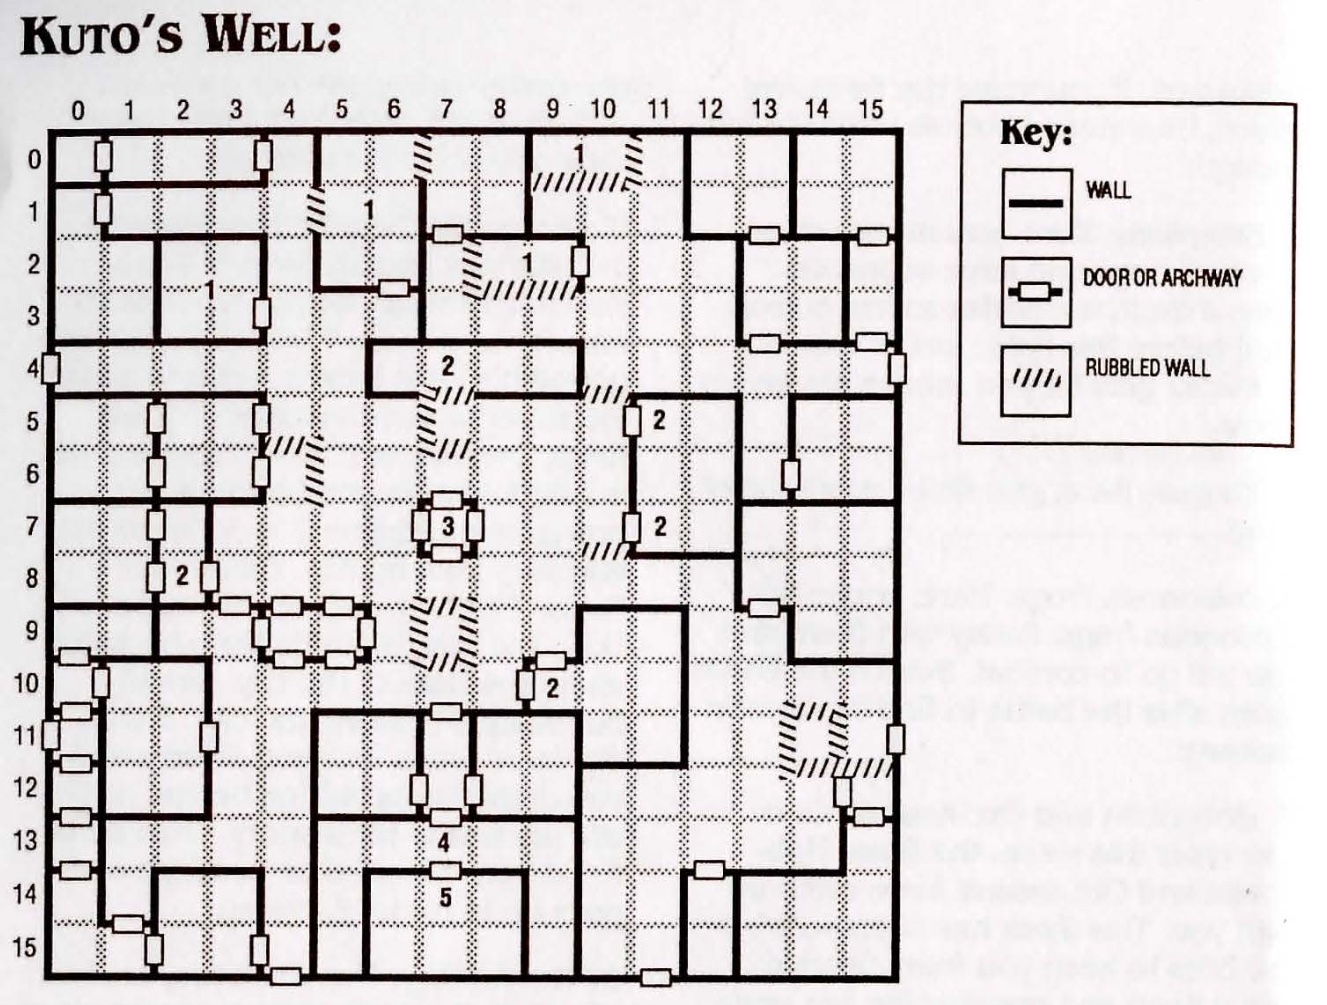 Map from the clue book for the CRPG Pool of Radiance showing 'Kuto's Well'.  Note the well featured prominently in the center, and the multiple locations possible for some of the encounters.